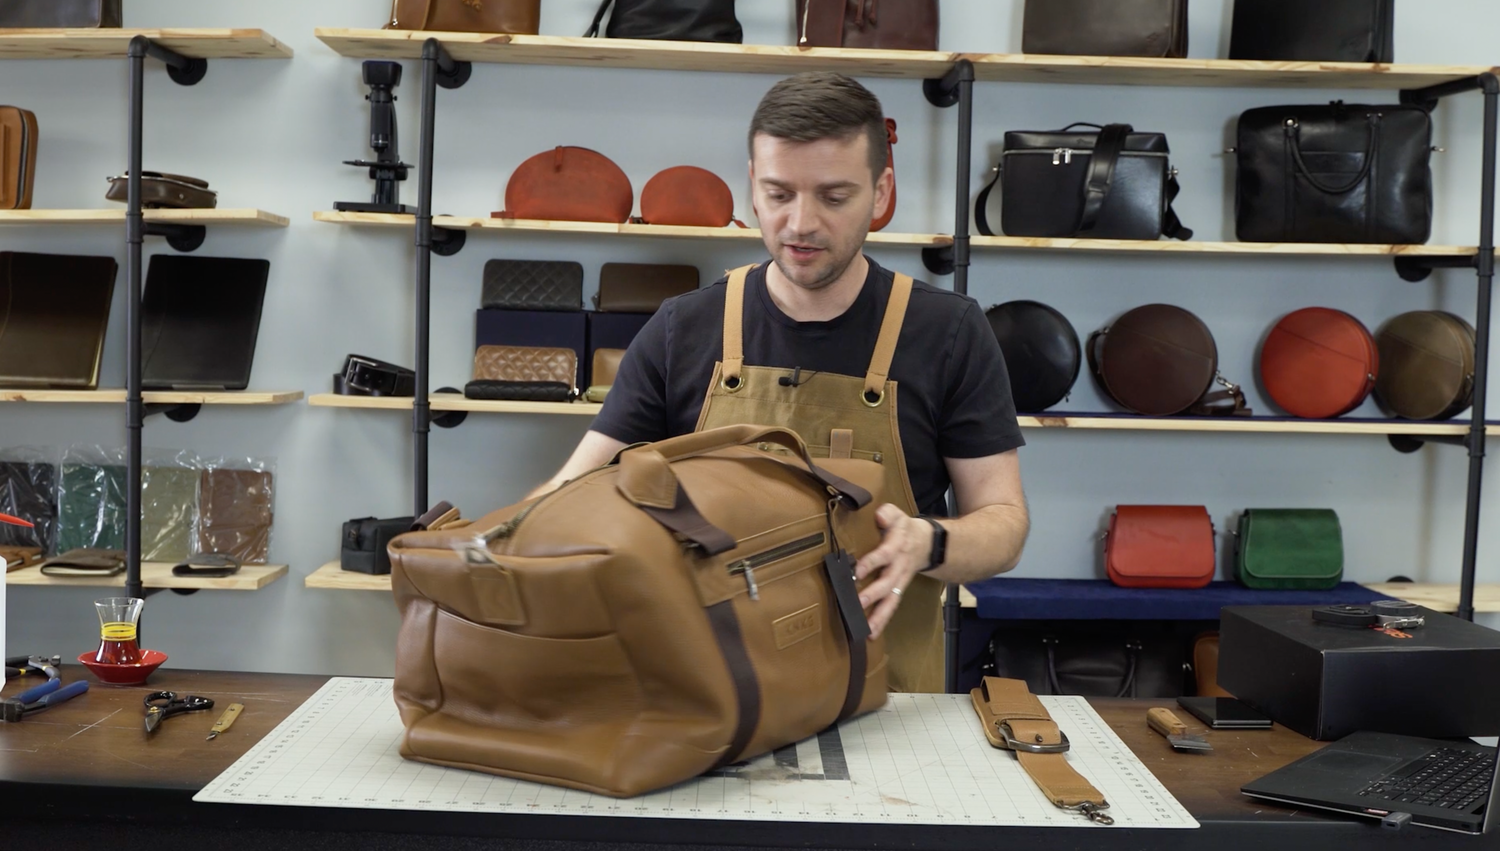 TANNER LEATHERSTEIN REVIEWS THE HERITAGE LEATHER DUFFEL